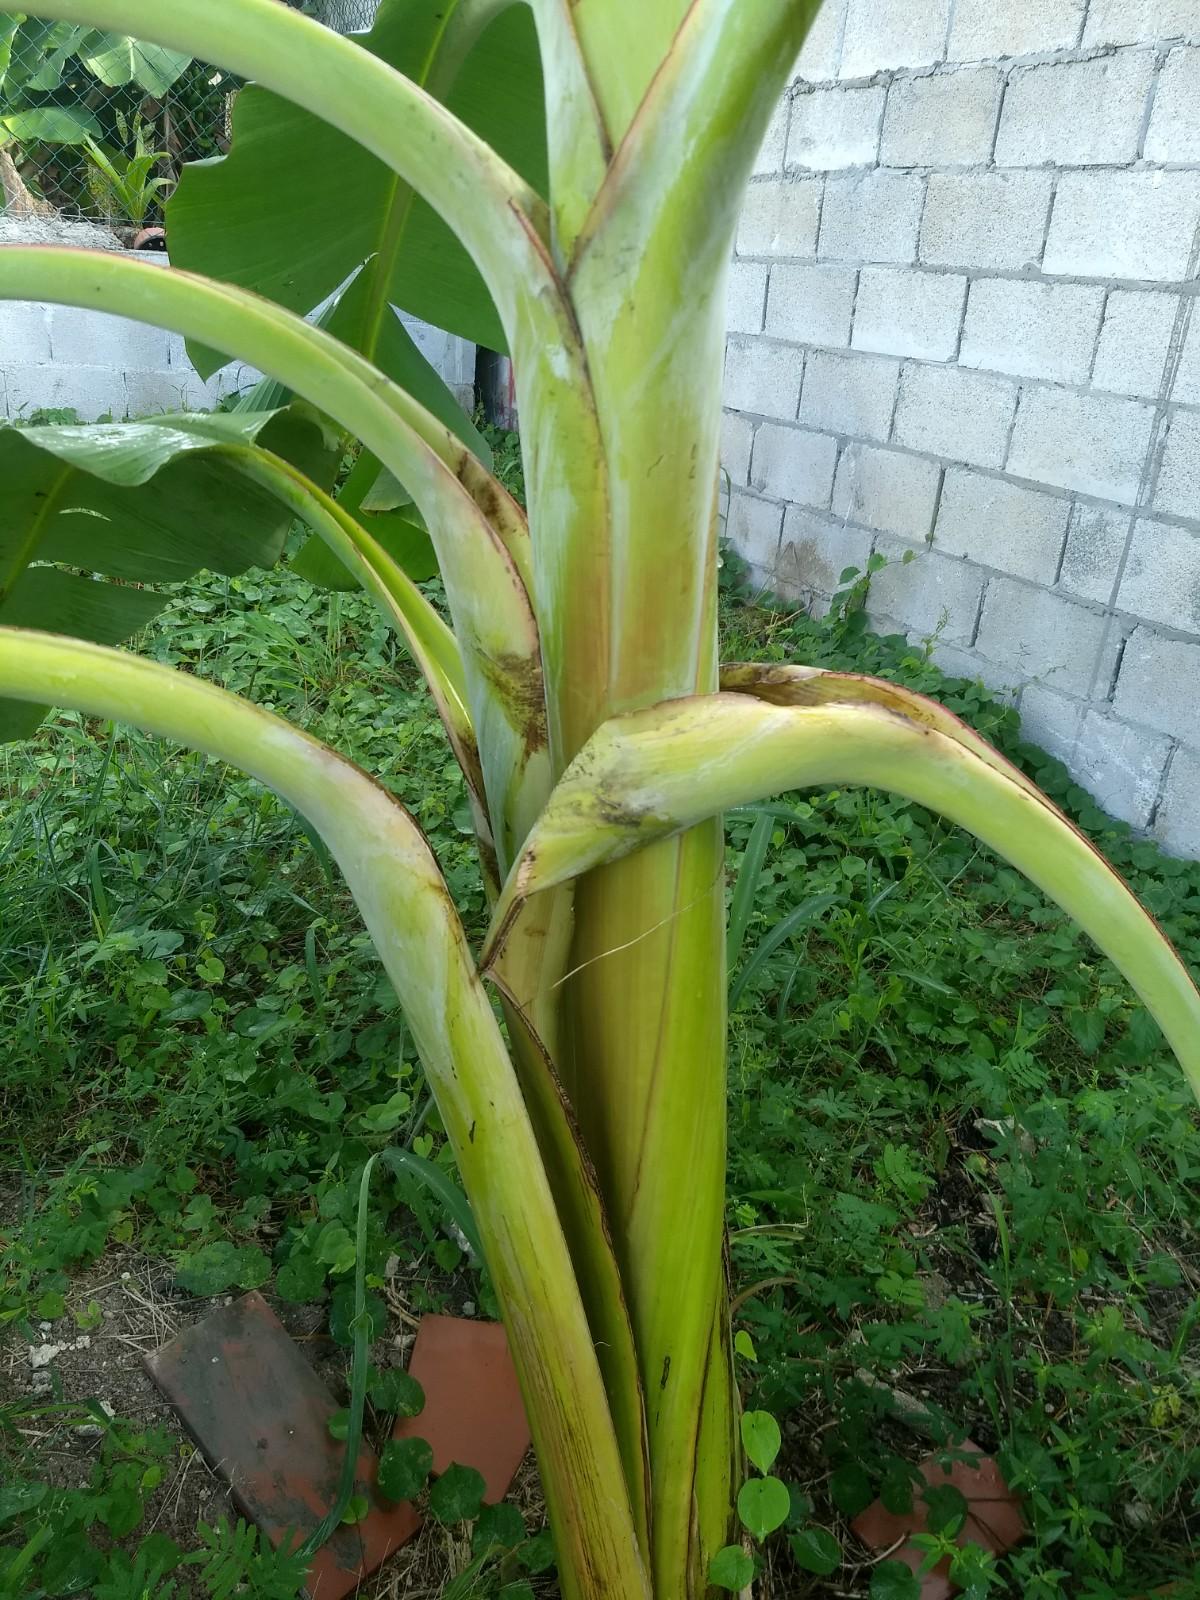 Plantain tree with separating leaves